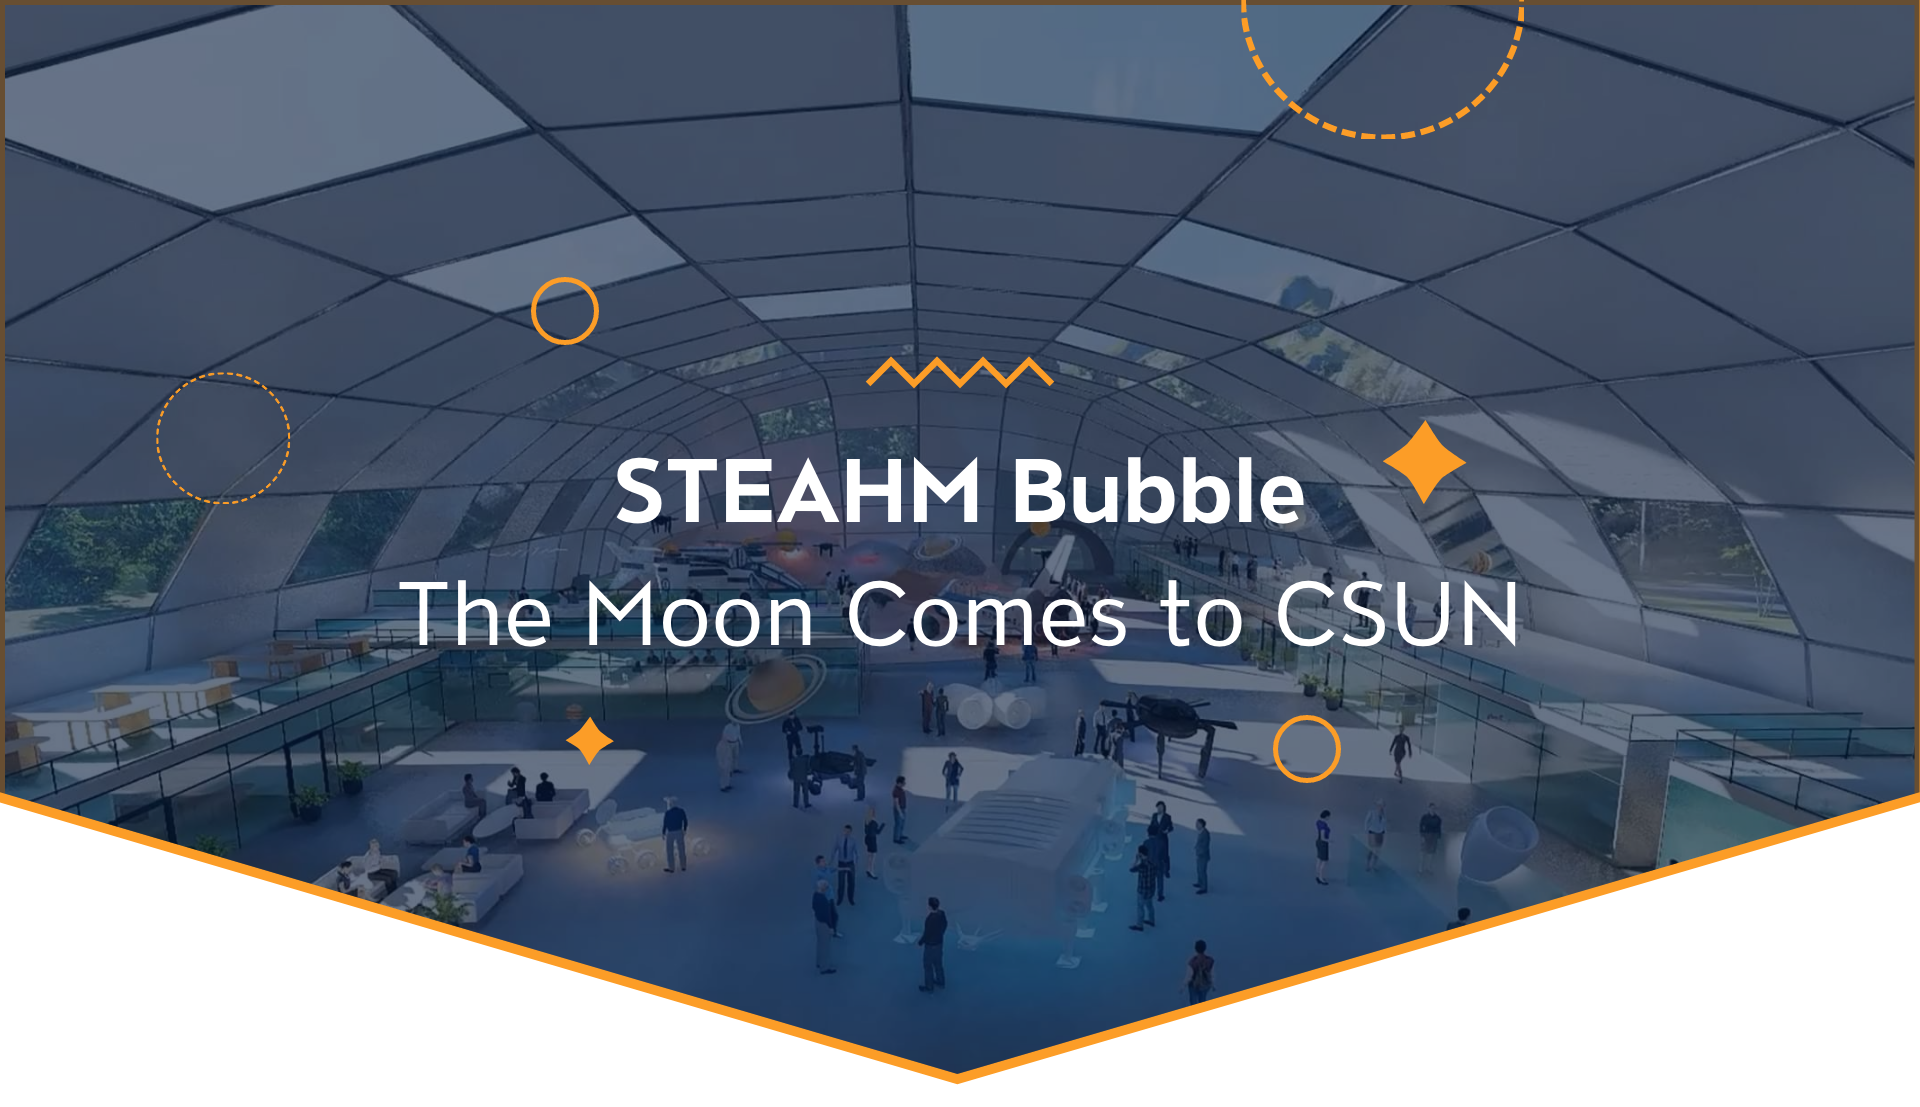 STEAHM Bubble: The Moon Comes to CSUN